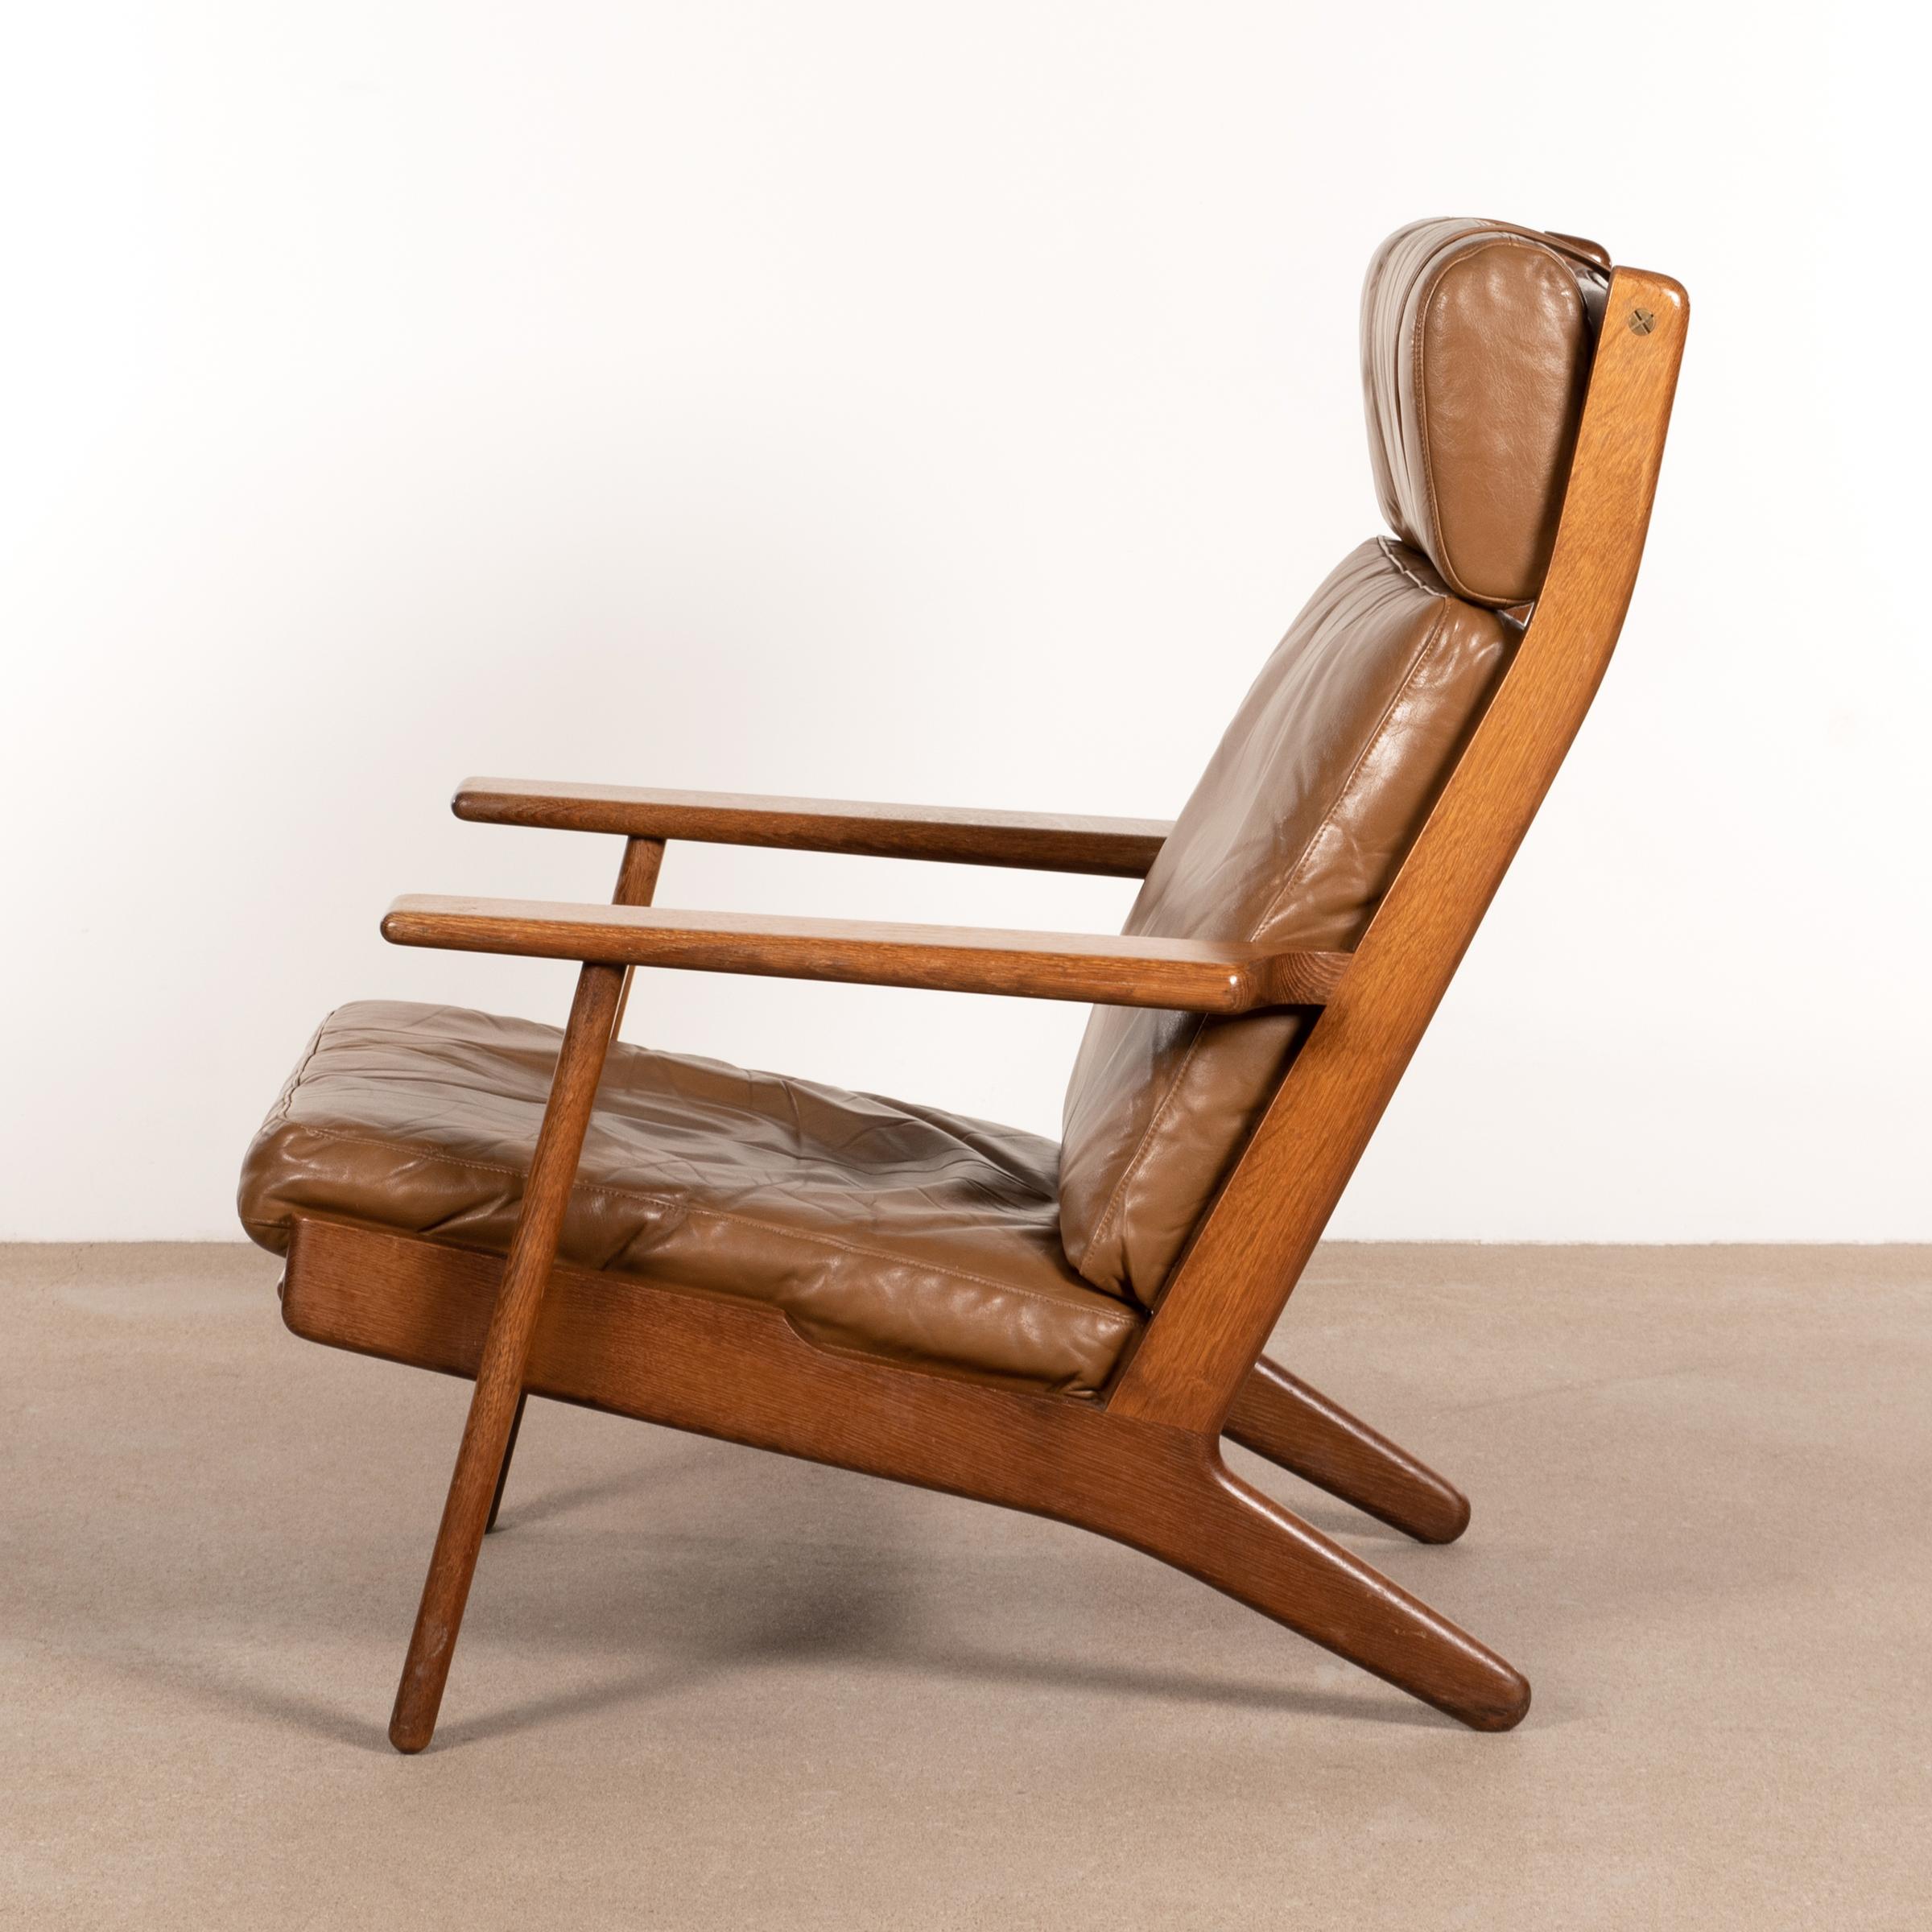 Hans Wegner GE290 lounge high back armchair for GETAMA. Teak varnished frame with brown leather cushions (with patina) in good original condition.